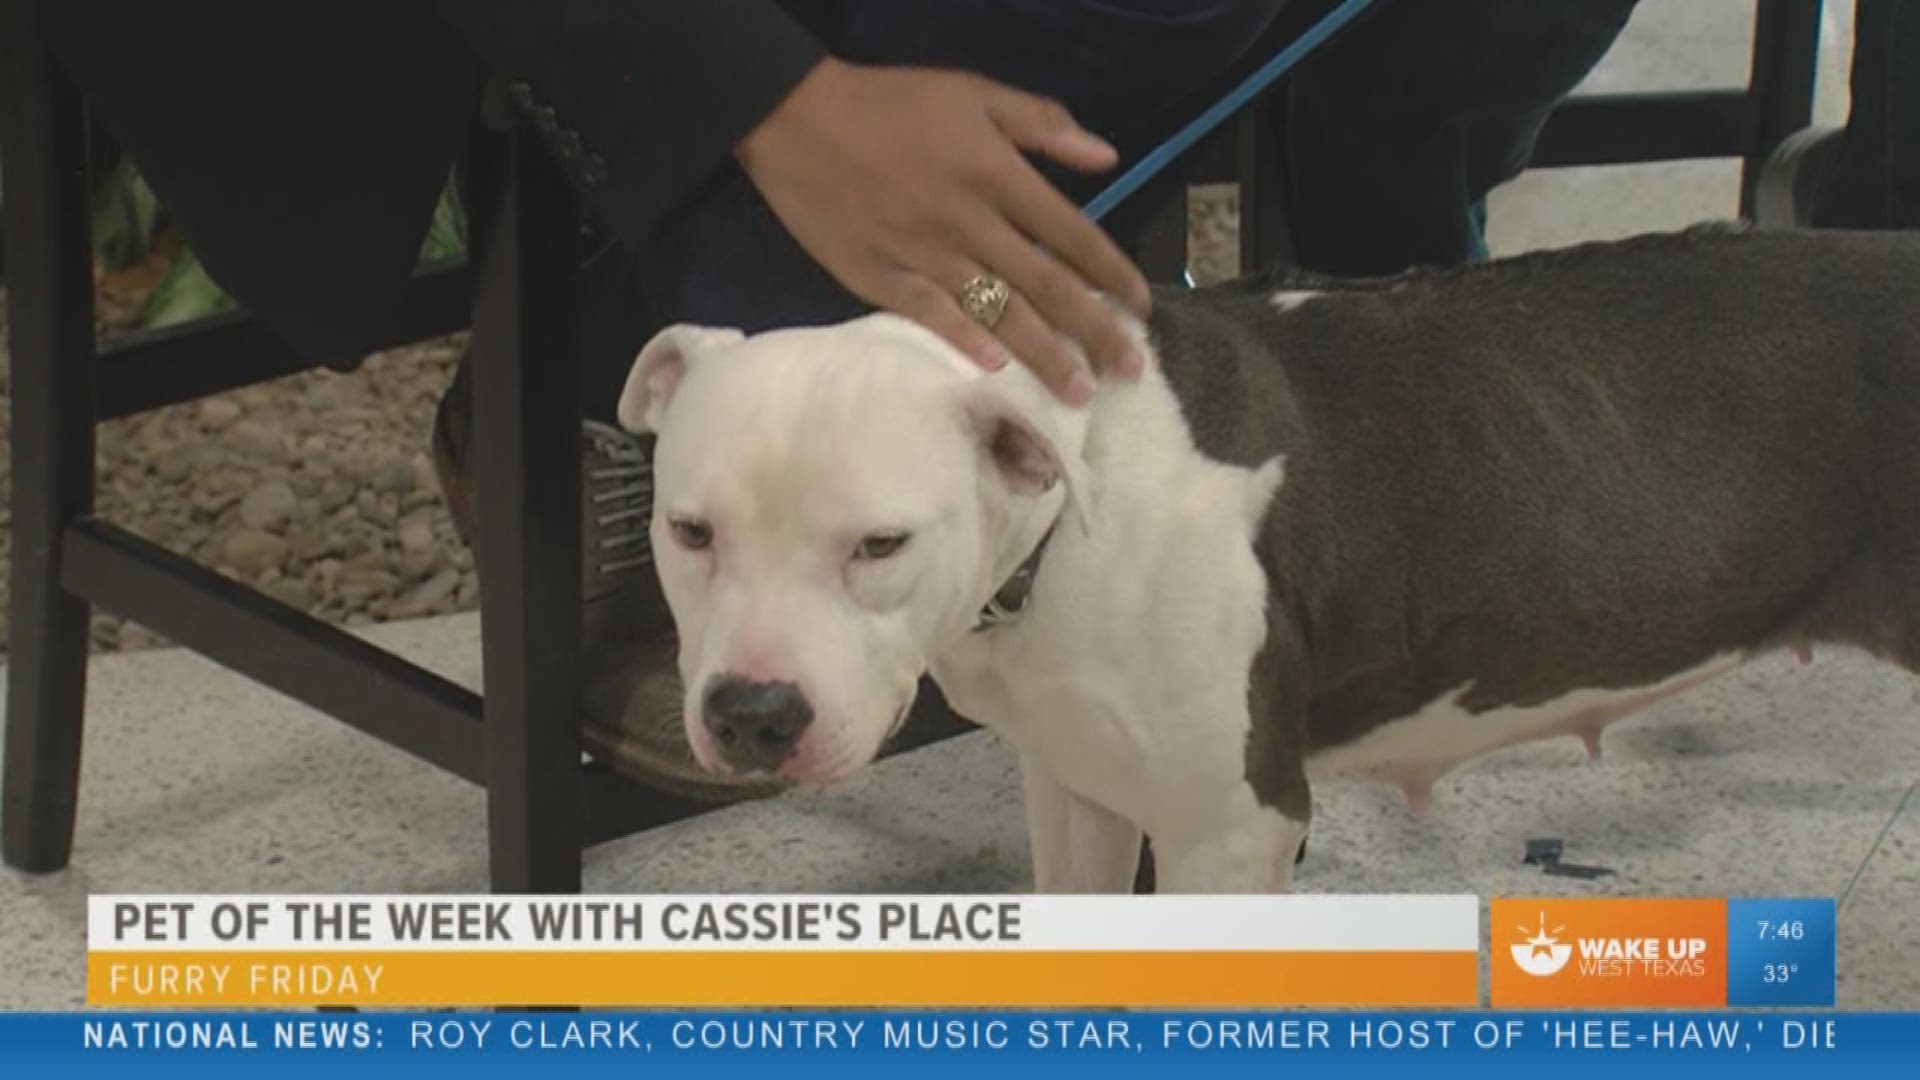 Our Malik Mingo speaks with Cassie's Place about their pet of the week, Justice.